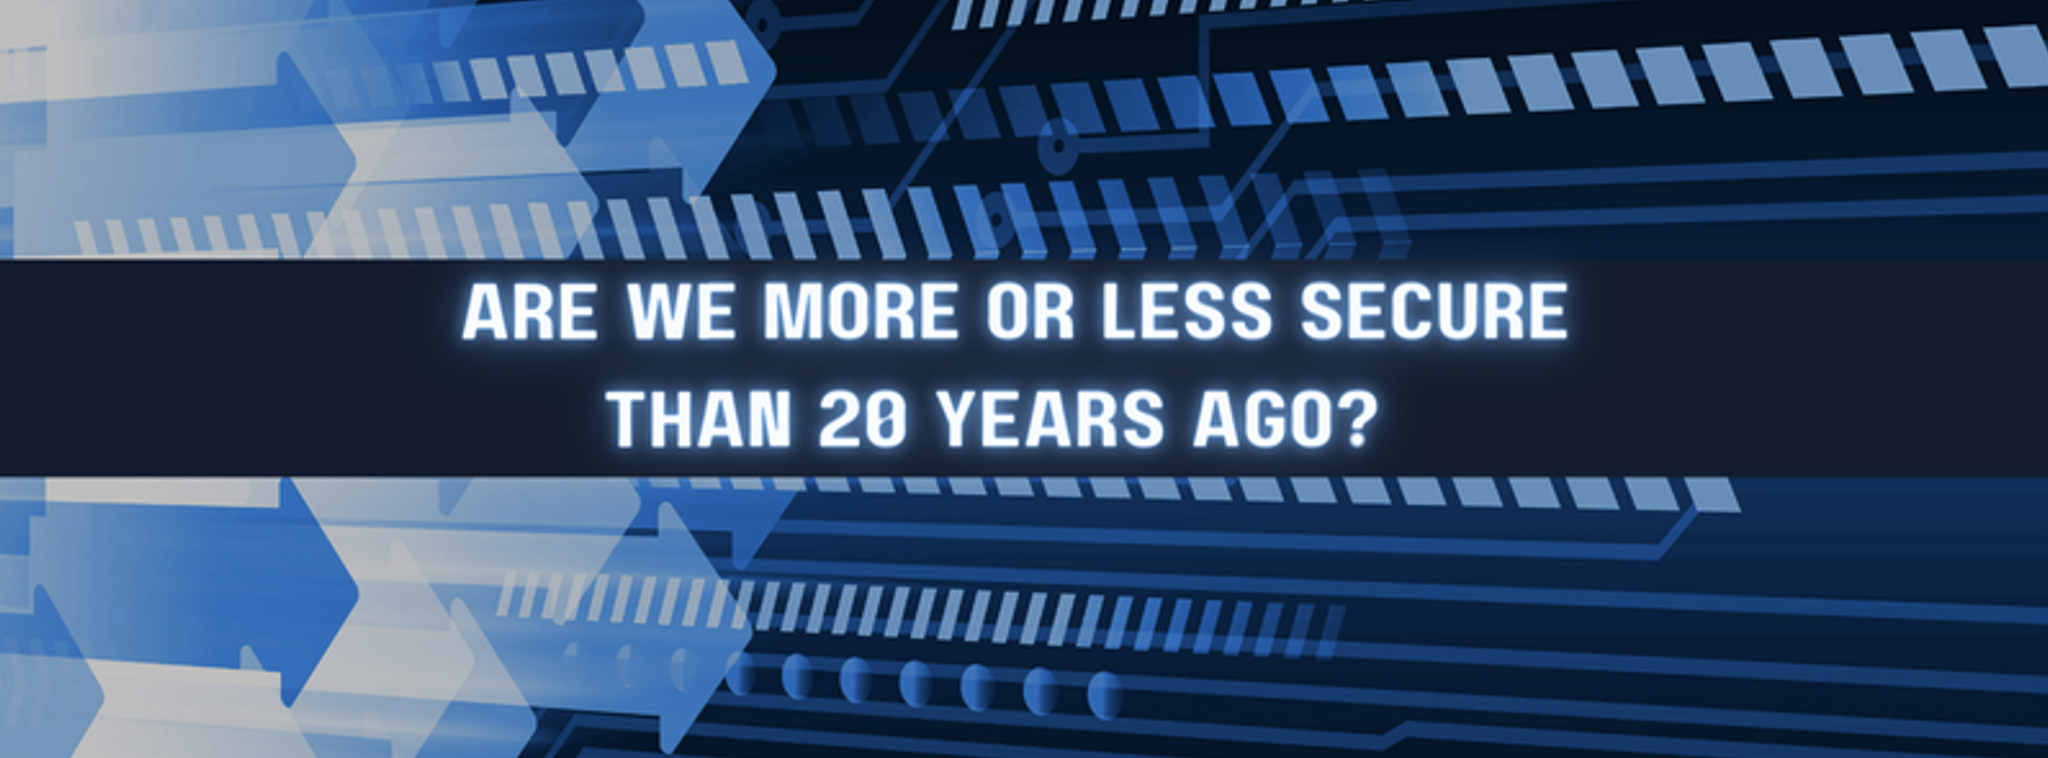 Are We More or Less Secure than 20 Years Ago?